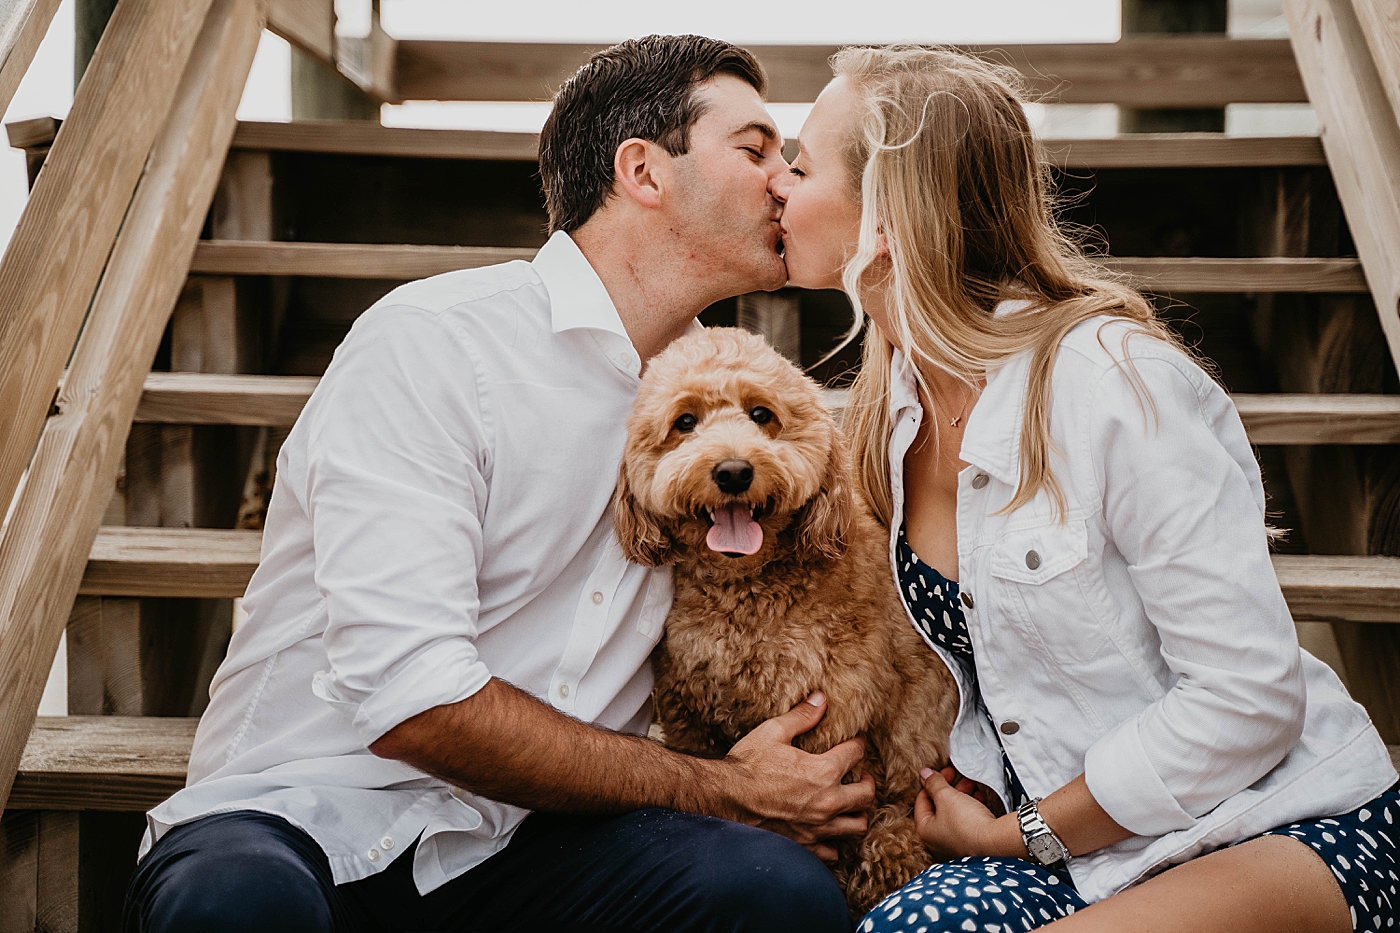 Couple kissing with dog in between them Palm Beach Engagement Photography captured by South Florida Engagement Photographer Krystal Capone Photography 